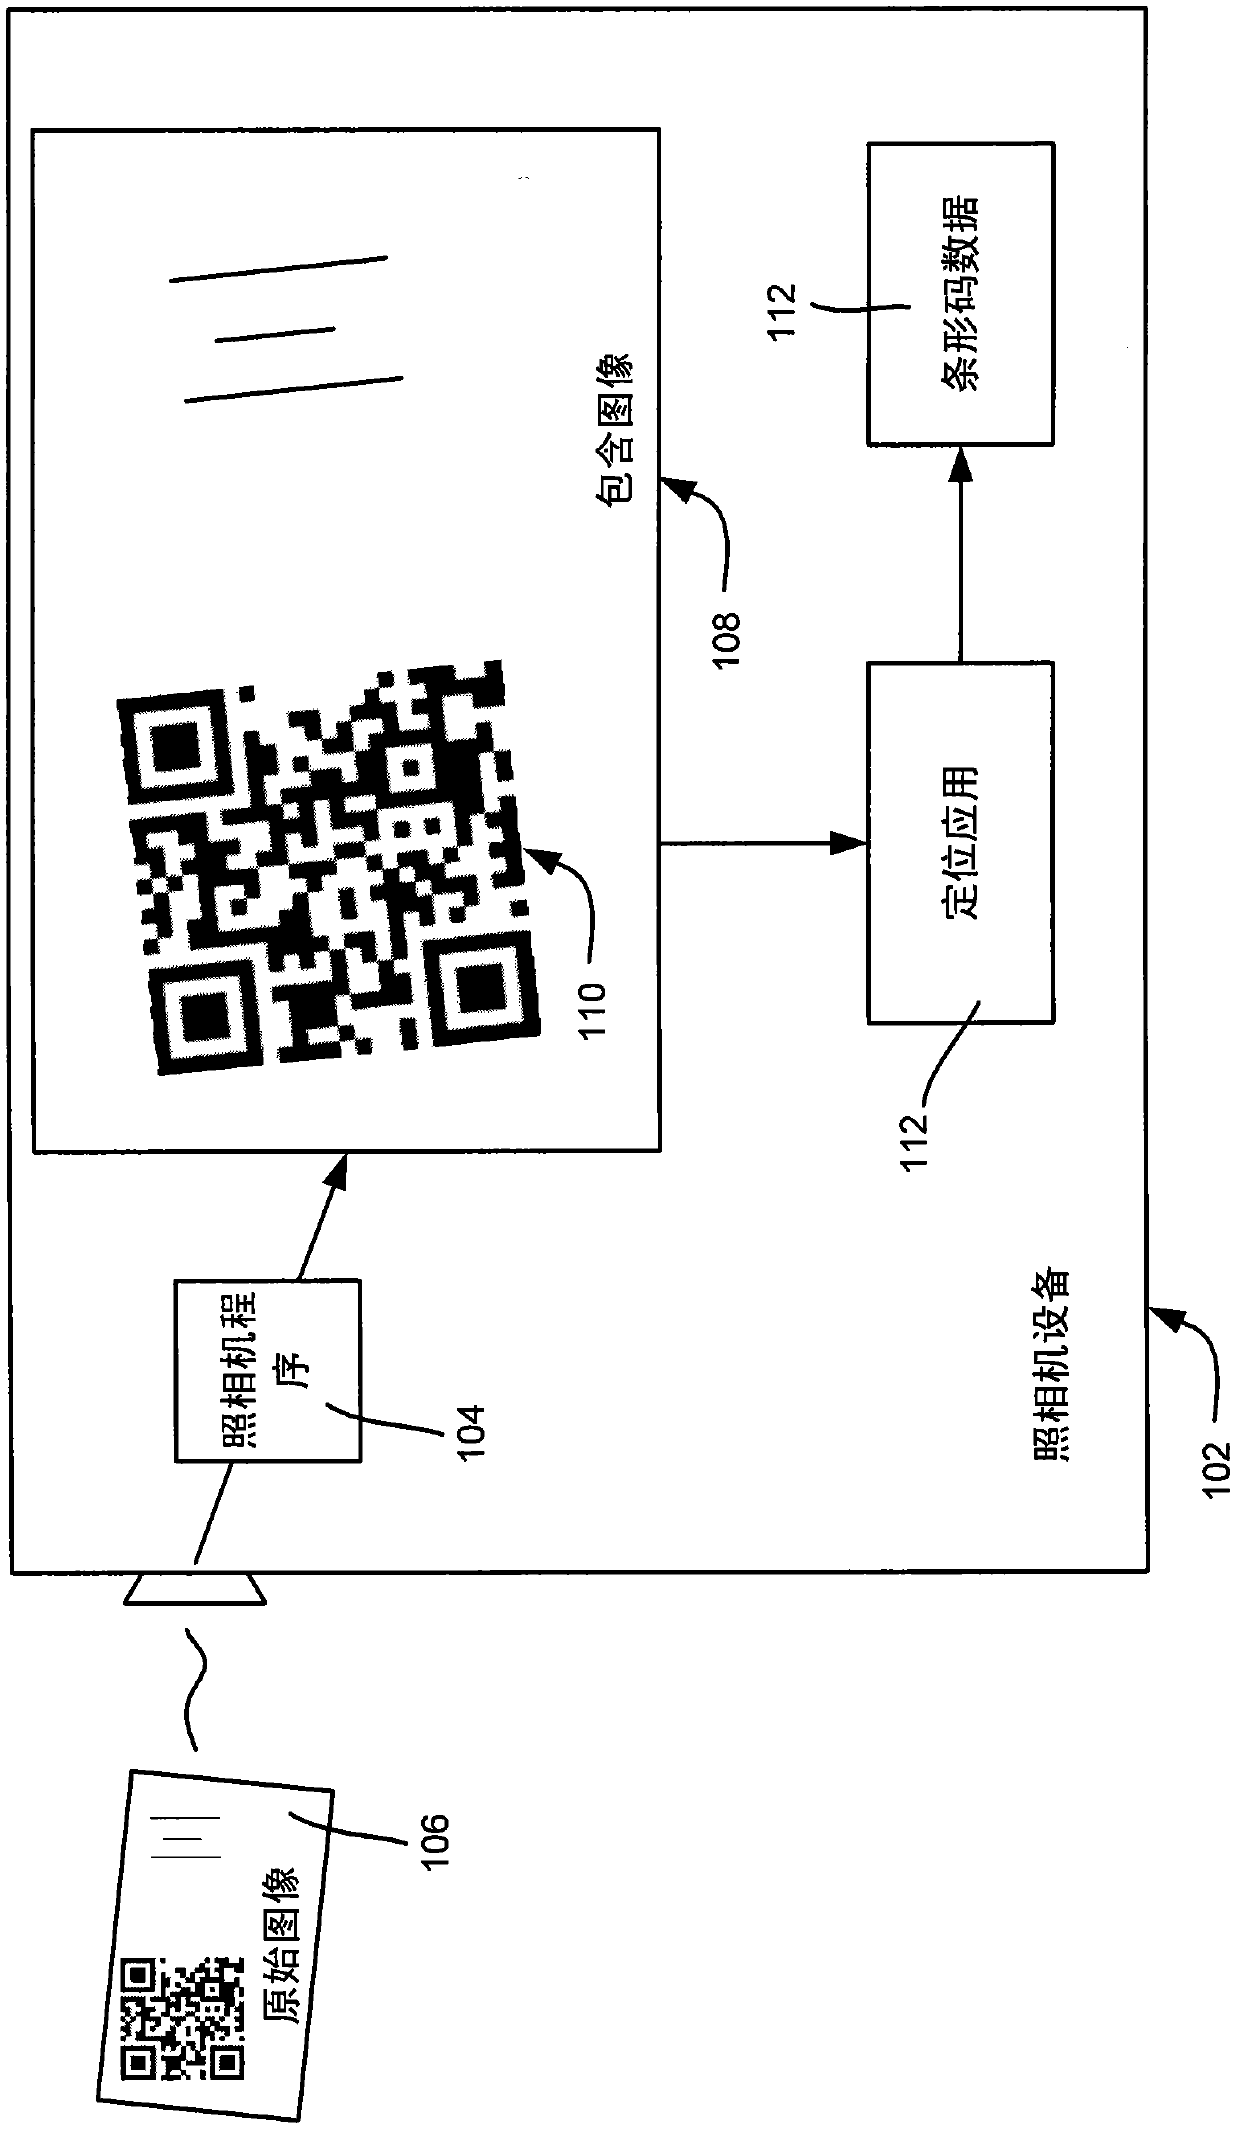 Two-dimensional barcode localization for camera based devices